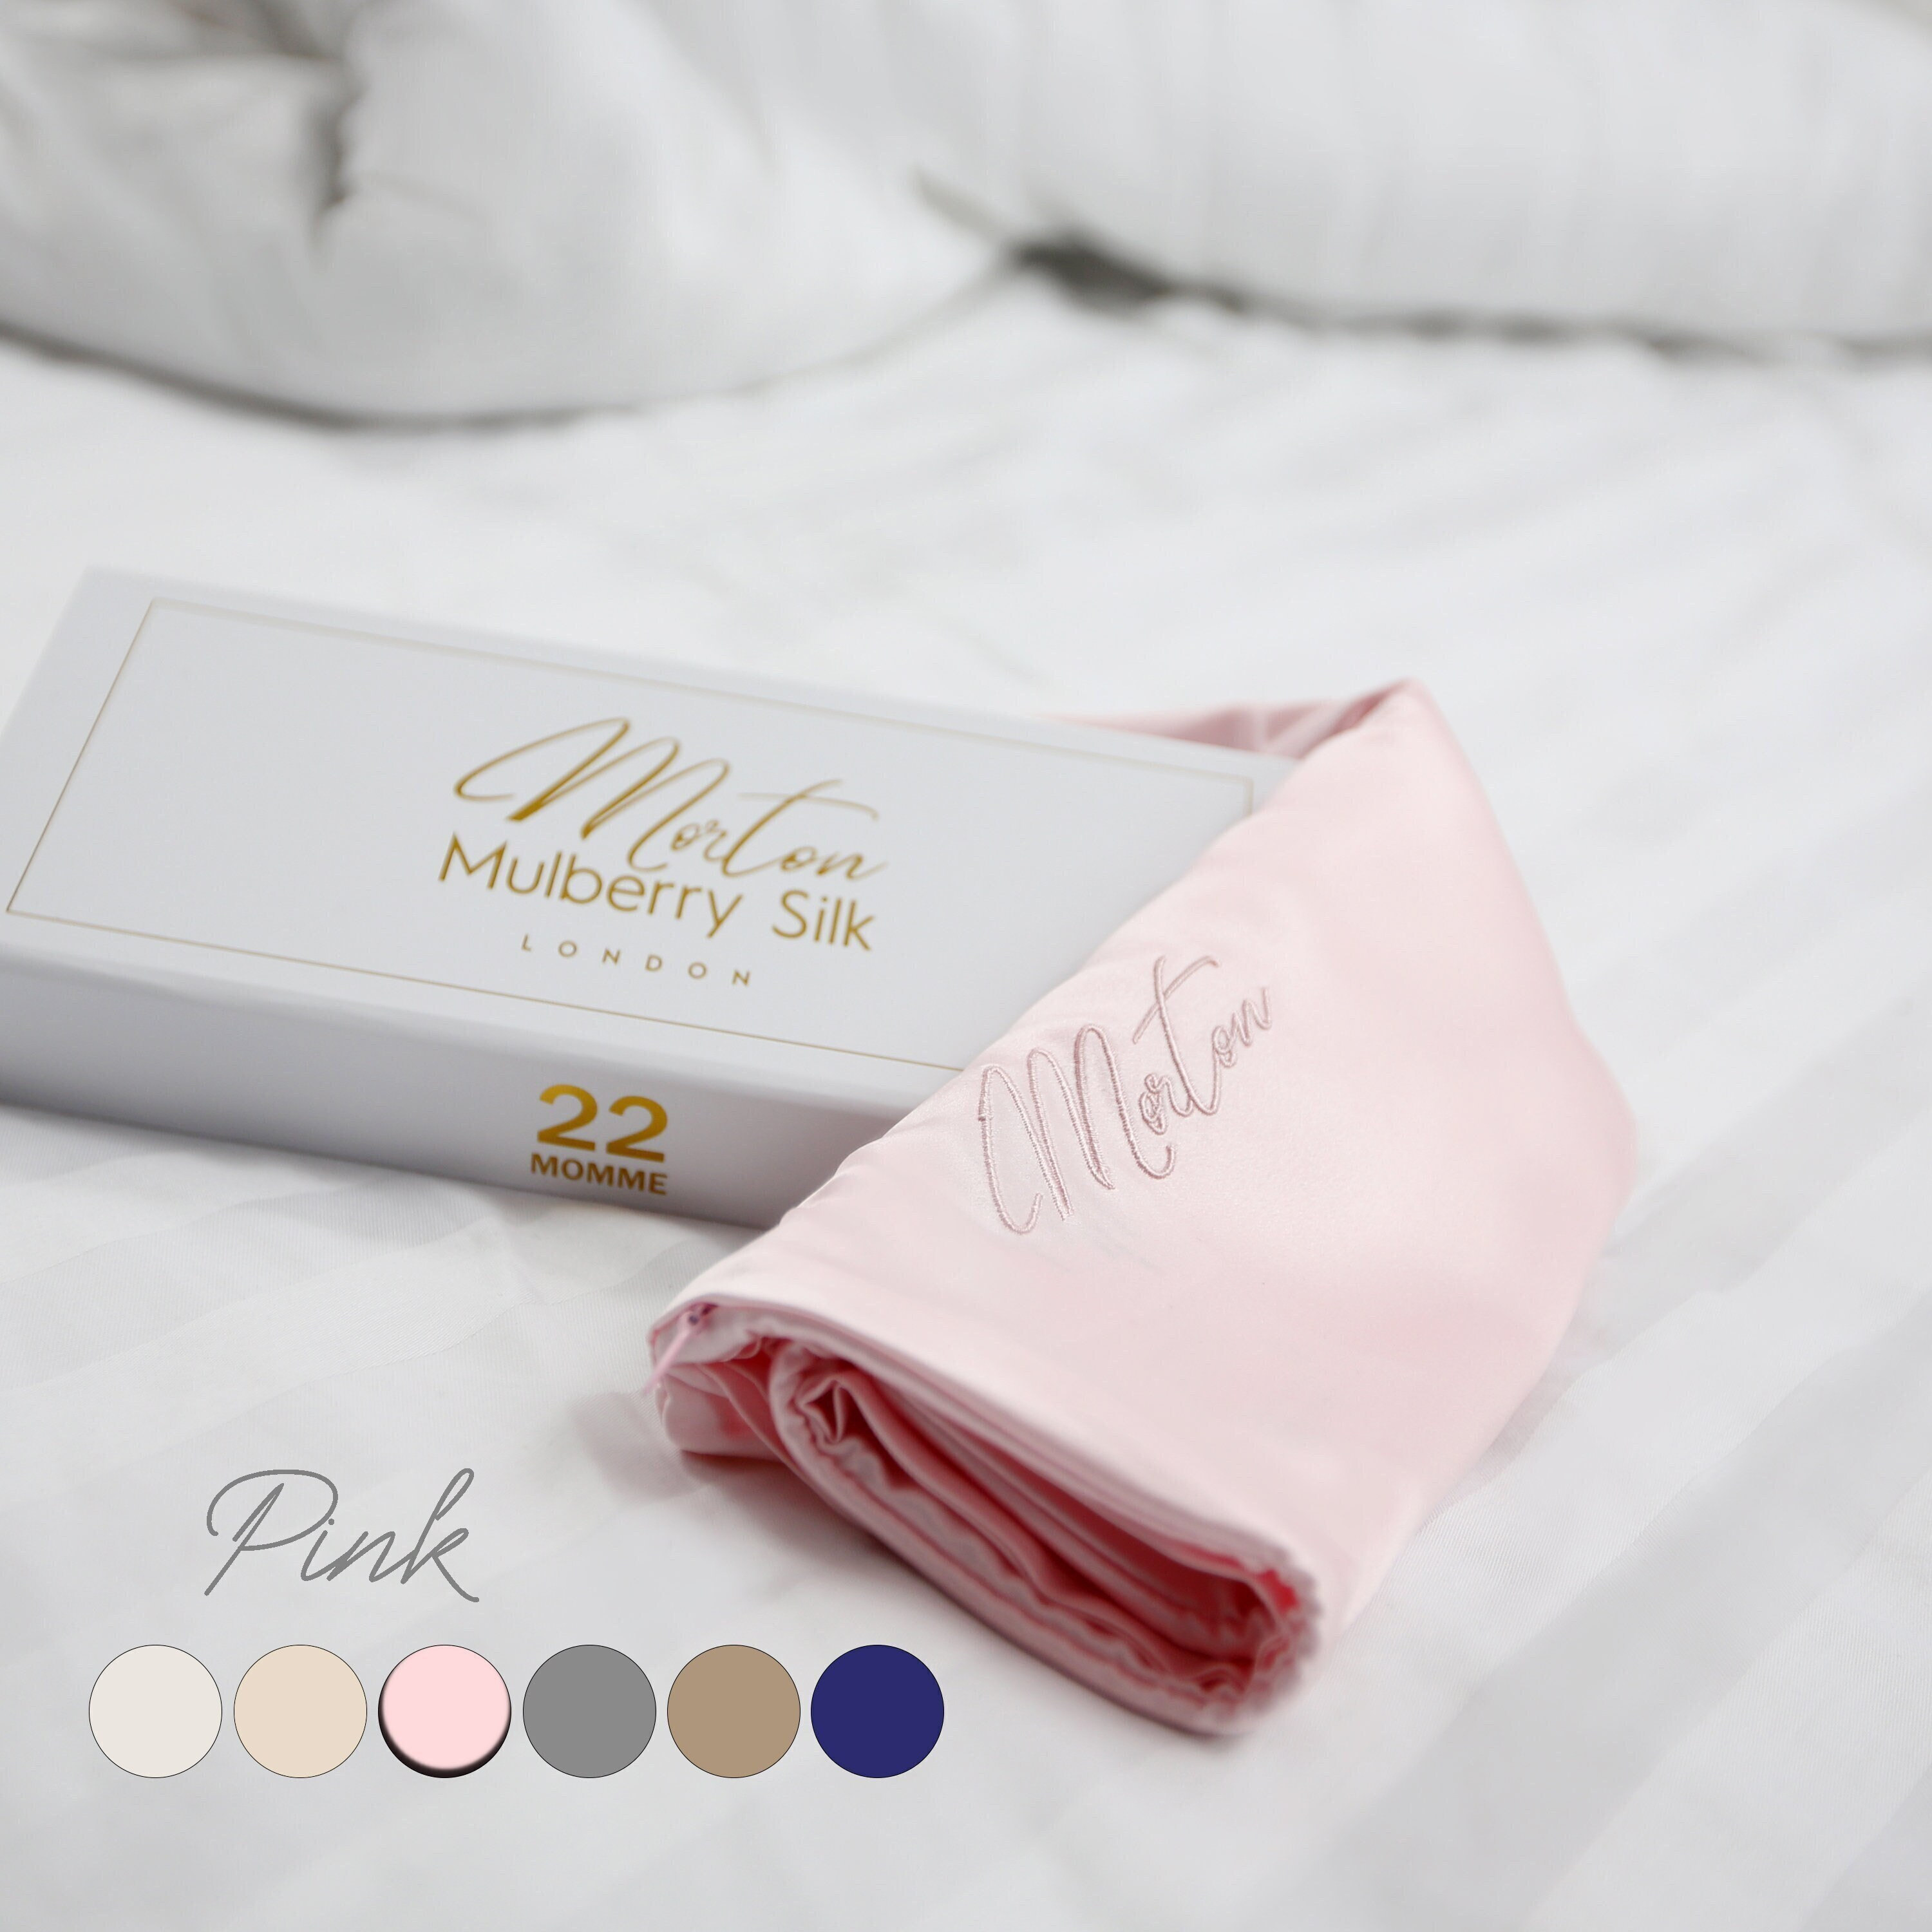 22 Momme 100% Pure Mulberry Silk Pillowcase for Hair and Skin Foto